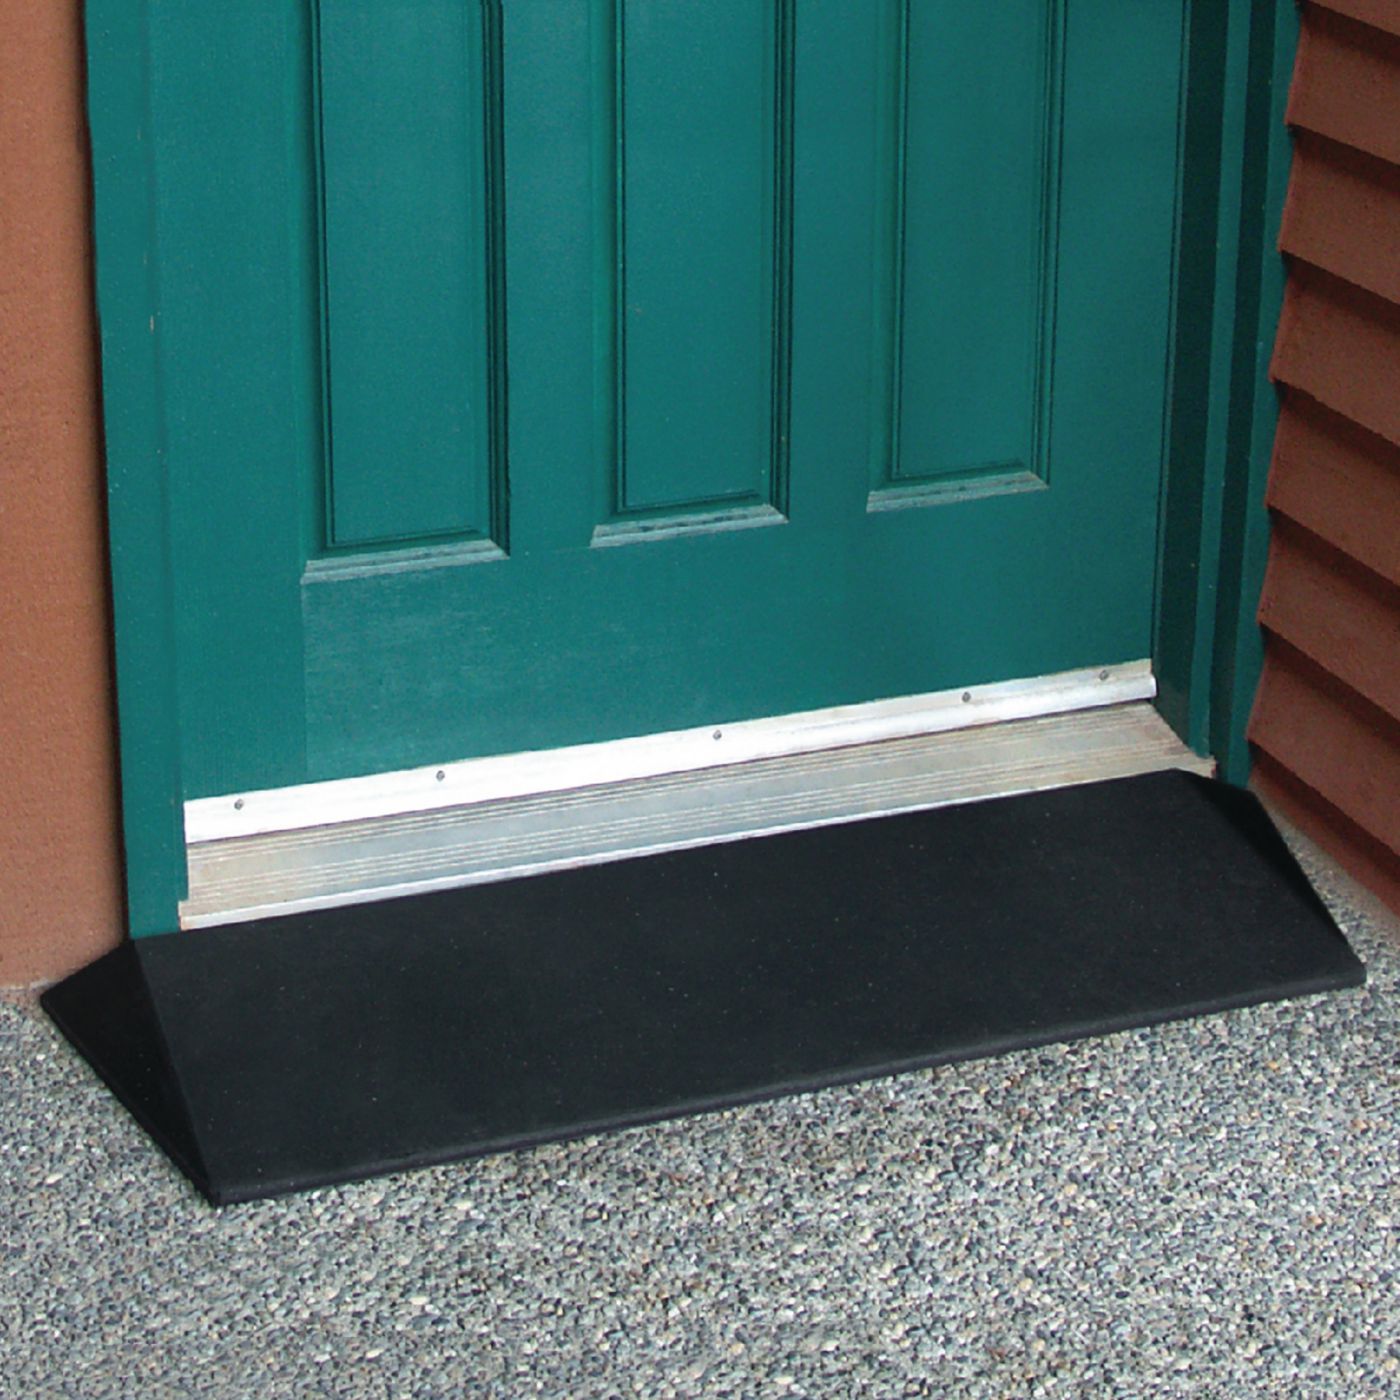 EZ-ACCESS Rubber Threshold Ramp with Beveled Sides